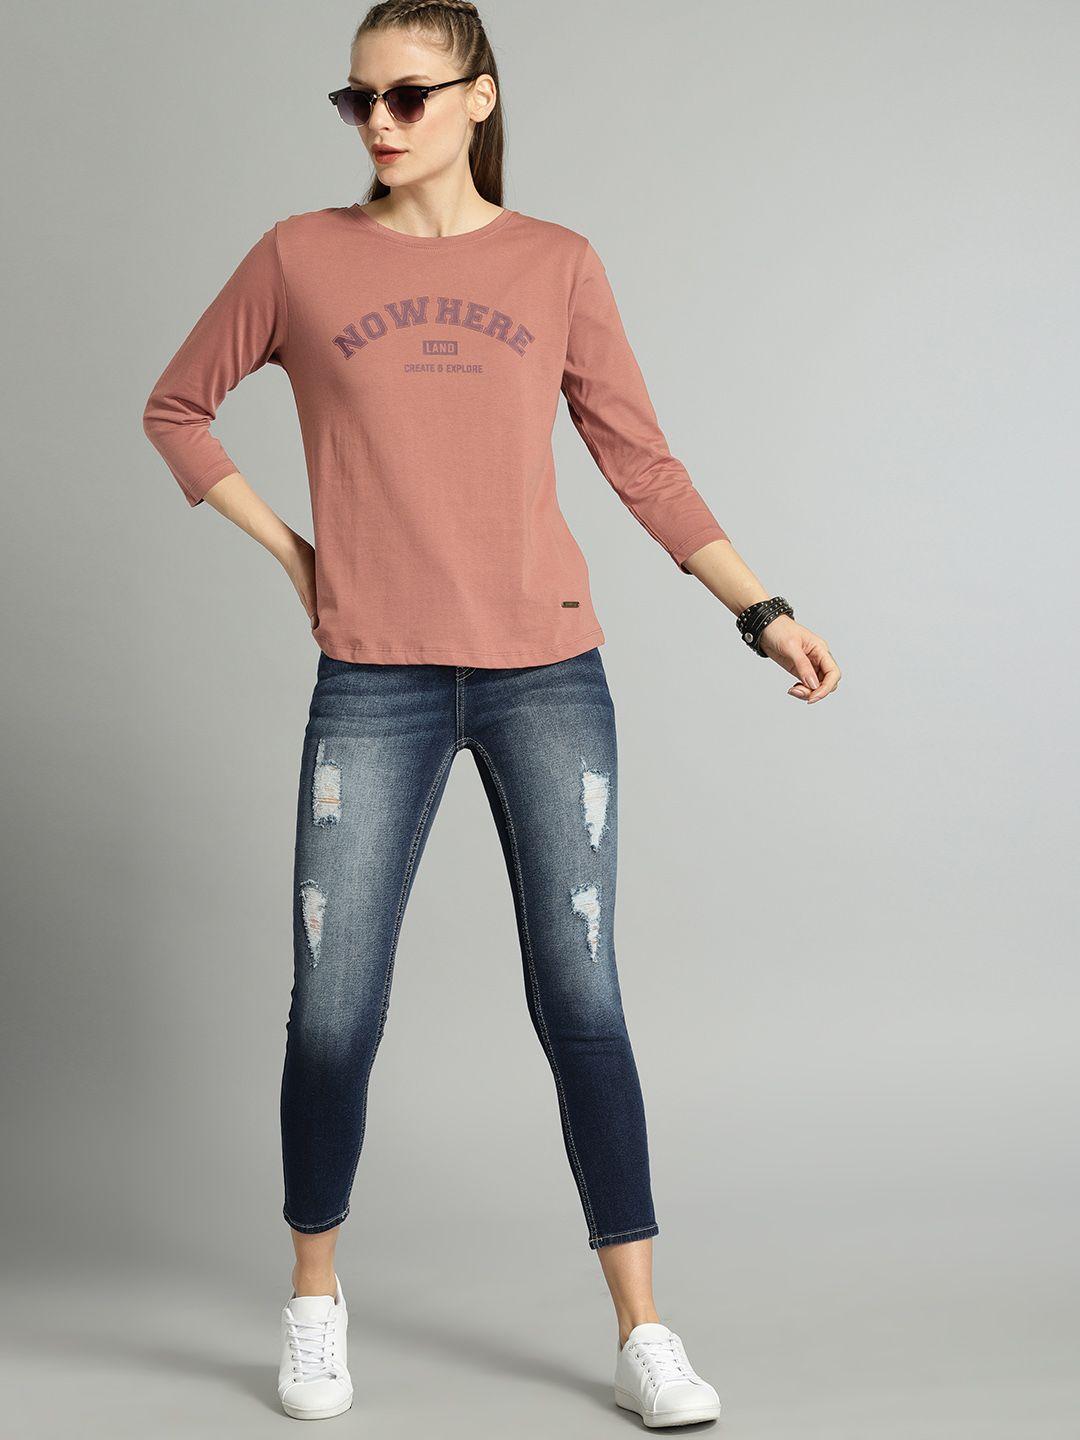 The Roadster Lifestyle Co Women Mauve Printed Round Neck T-shirt